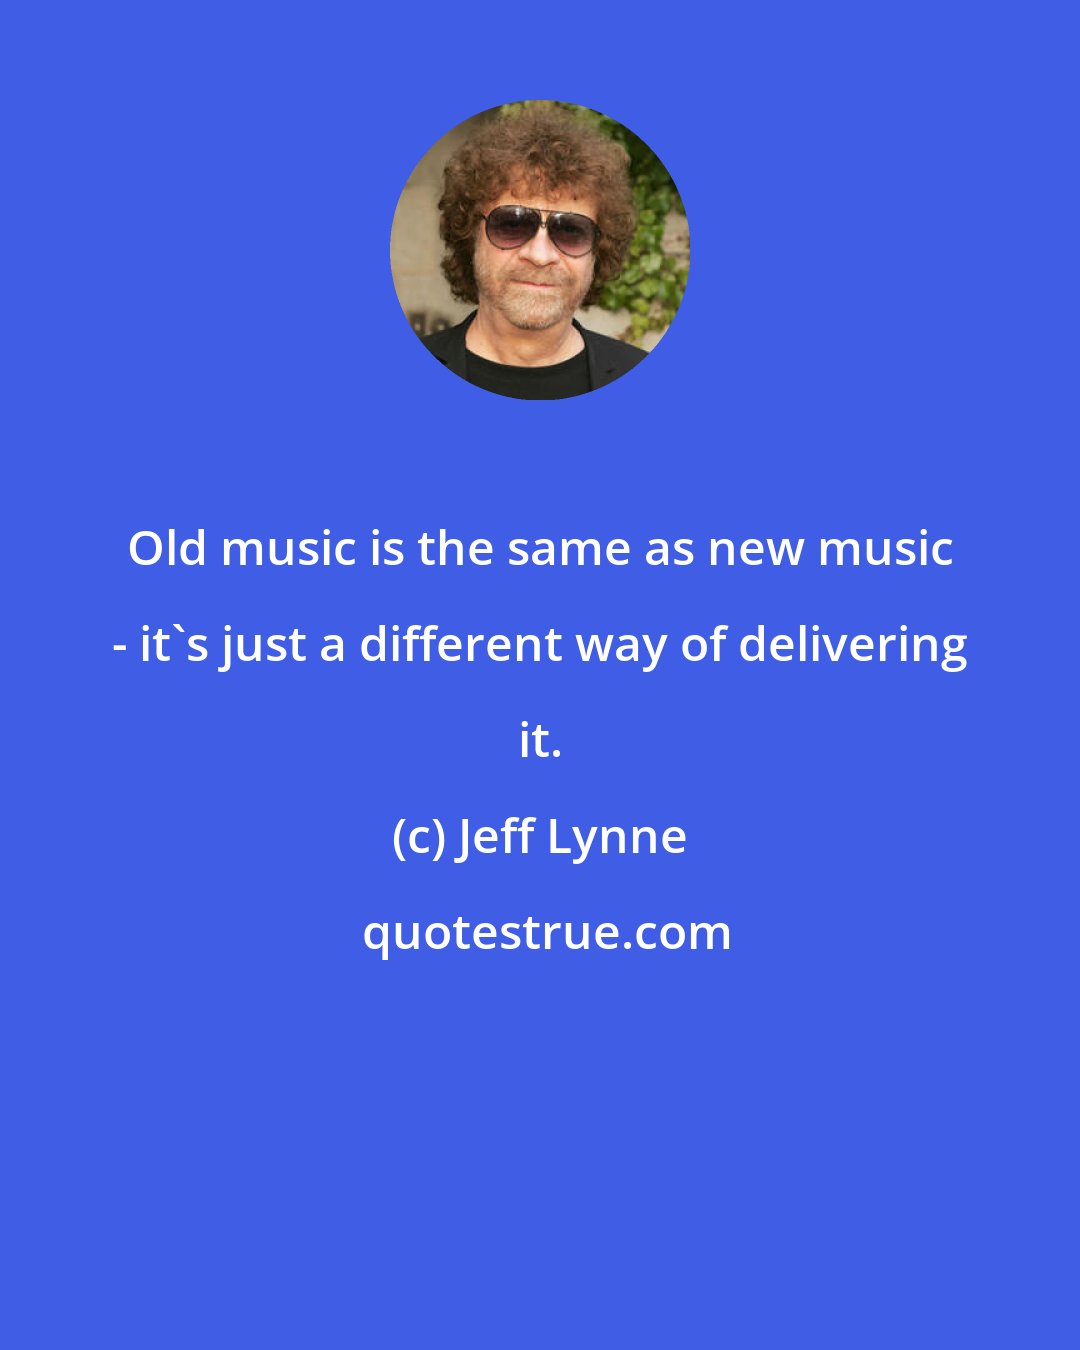 Jeff Lynne: Old music is the same as new music - it's just a different way of delivering it.